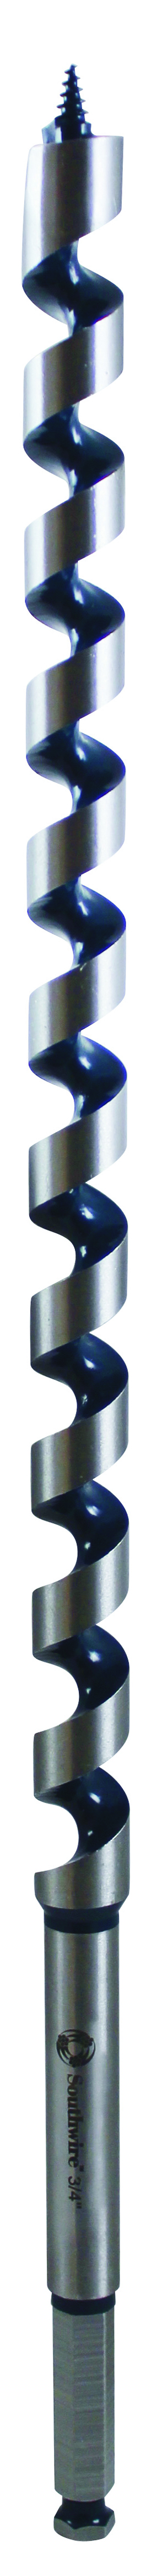 The SAB3/4X18 is a heavy duty ship auger bit, featuring a self-feeding screw tip, drills clean holes through nails, wood, vinyl, plastics, and heavy timber.